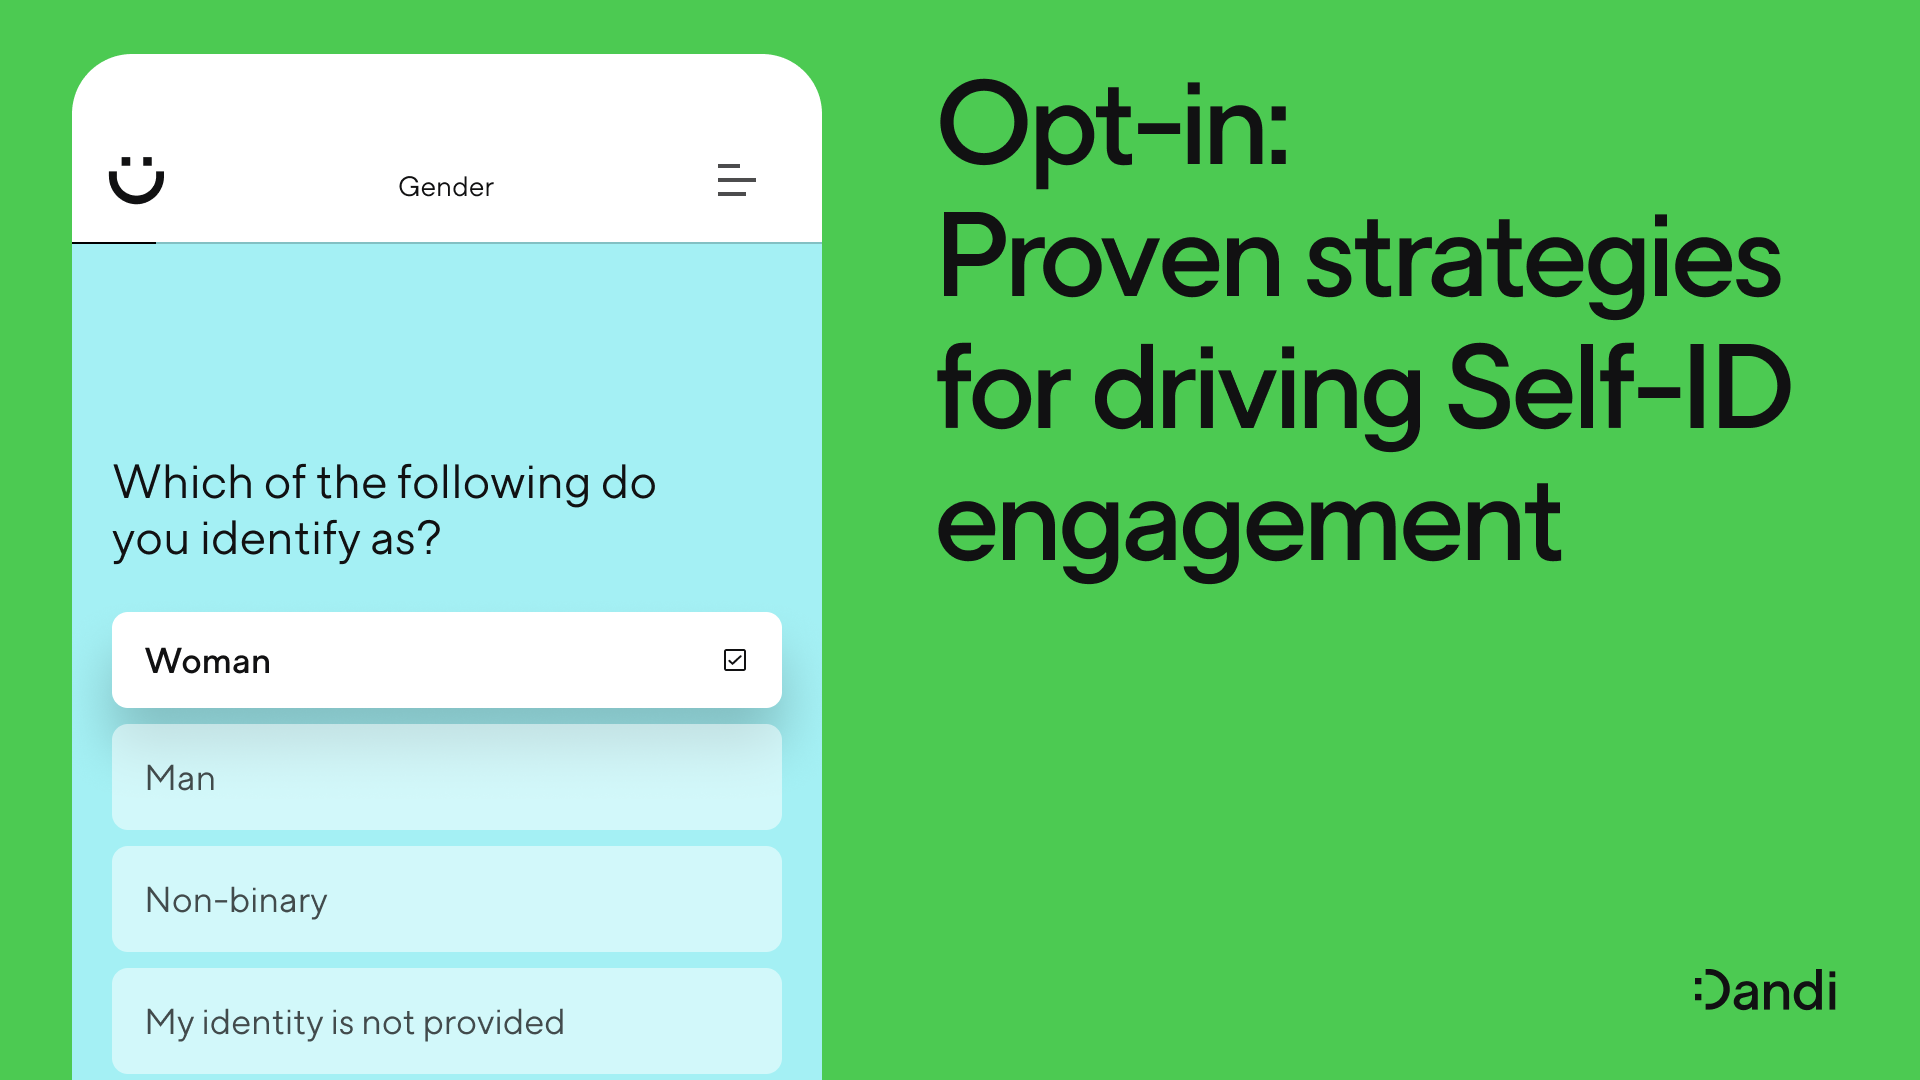 Mockup of a Dandi self-ID employee survey in a mobile phone screen. Headline alongside reads: Opt-in: Proven strategies for driving self-ID engagement